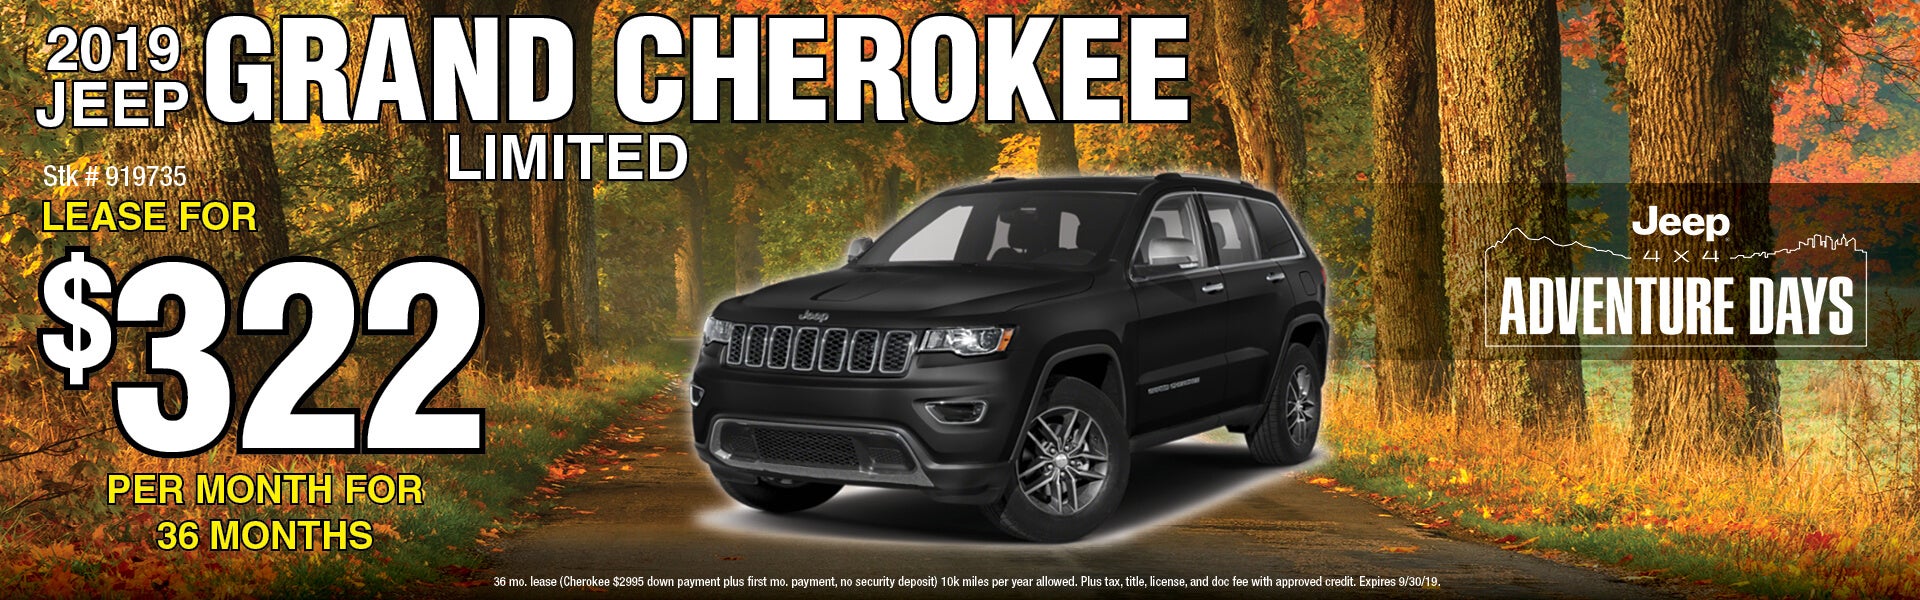 Lease a 2019 Jeep Grand Cherokee for $322/mo for 36 mo